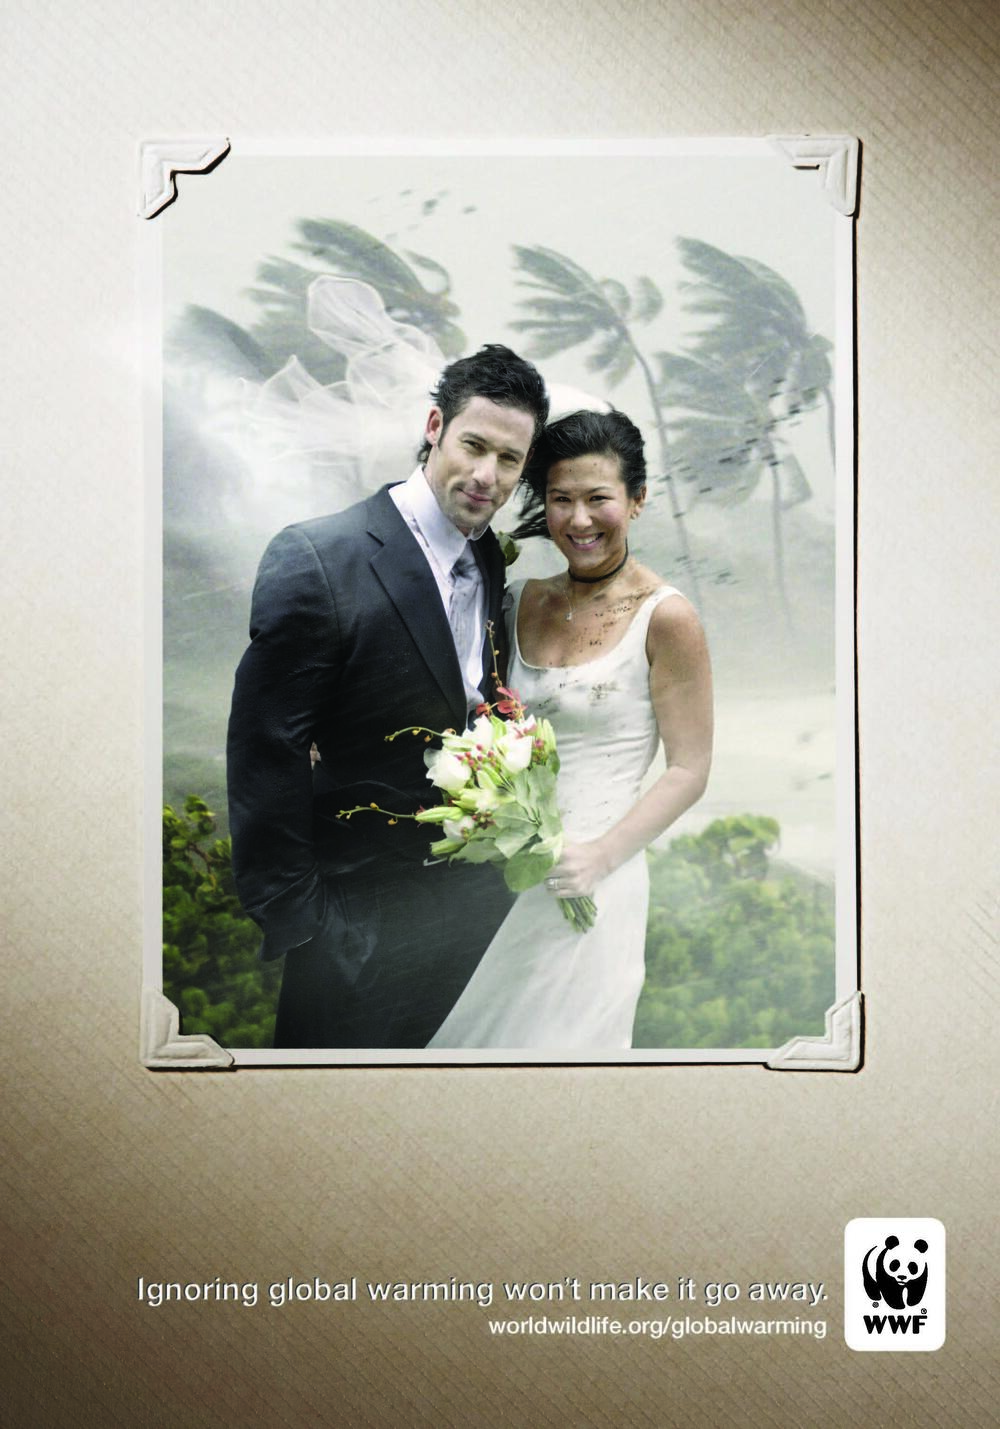 PSA: Image of wedding couple in a simulated hurricane in a tropical locale